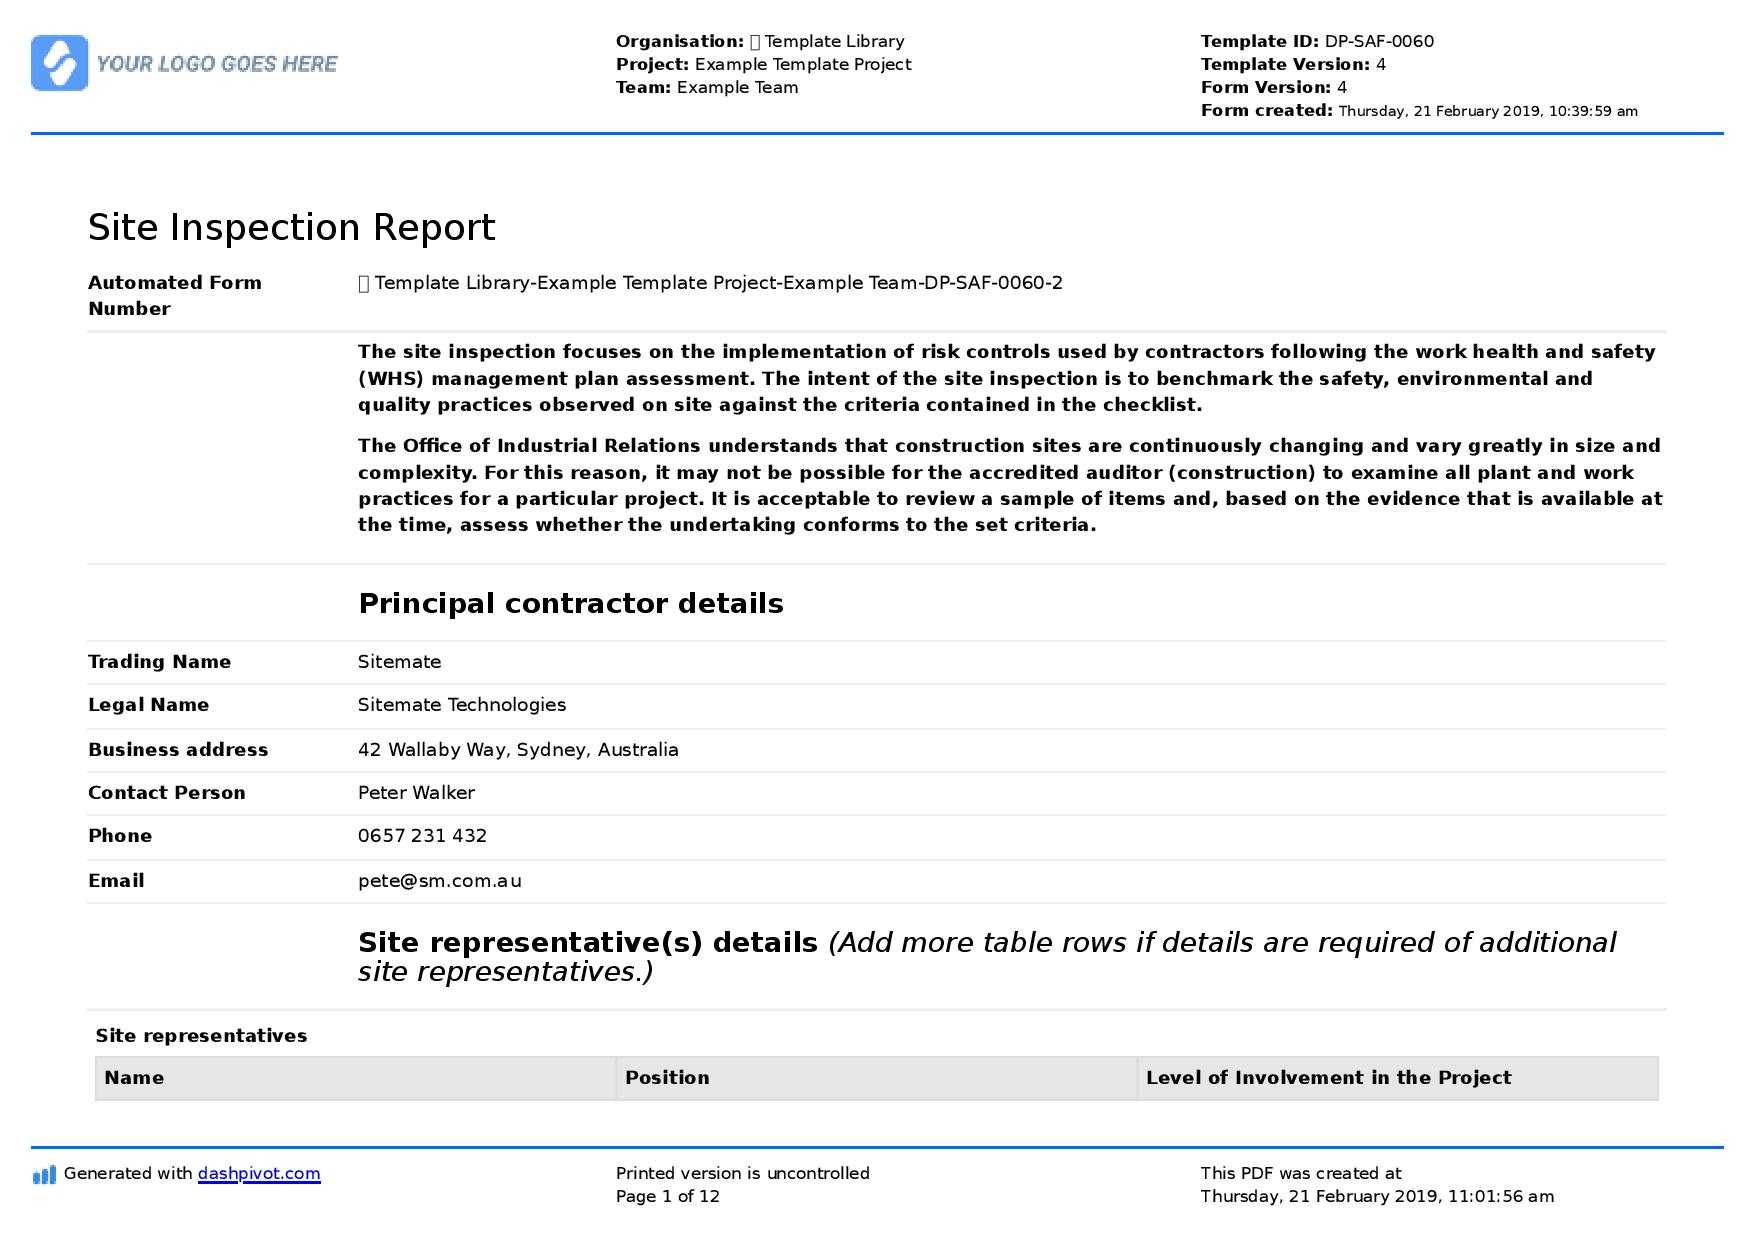 Site Inspection Report: Free Template, Sample And A Proven Pertaining To Company Report Format Template